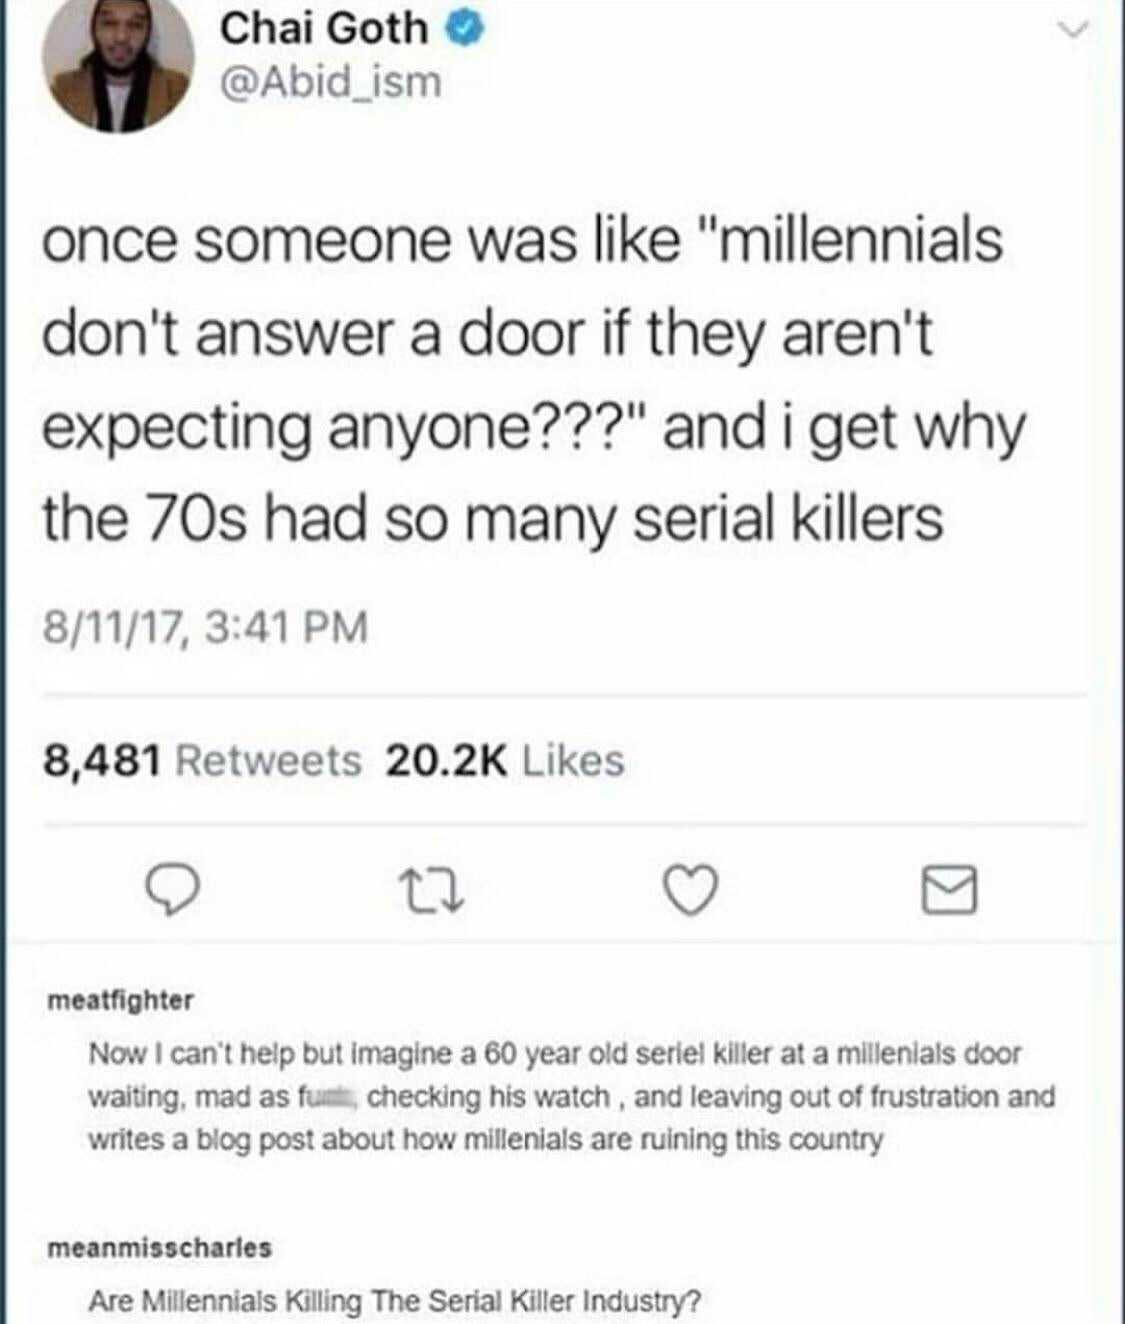 millennials serial killers - Chai Goth once someone was "millennials don't answer a door if they aren't expecting anyone???" and i get why the 70s had so many serial killers 81117, 8,481 meatfighter Now I can't help but imagine a 60 year old seriel killer